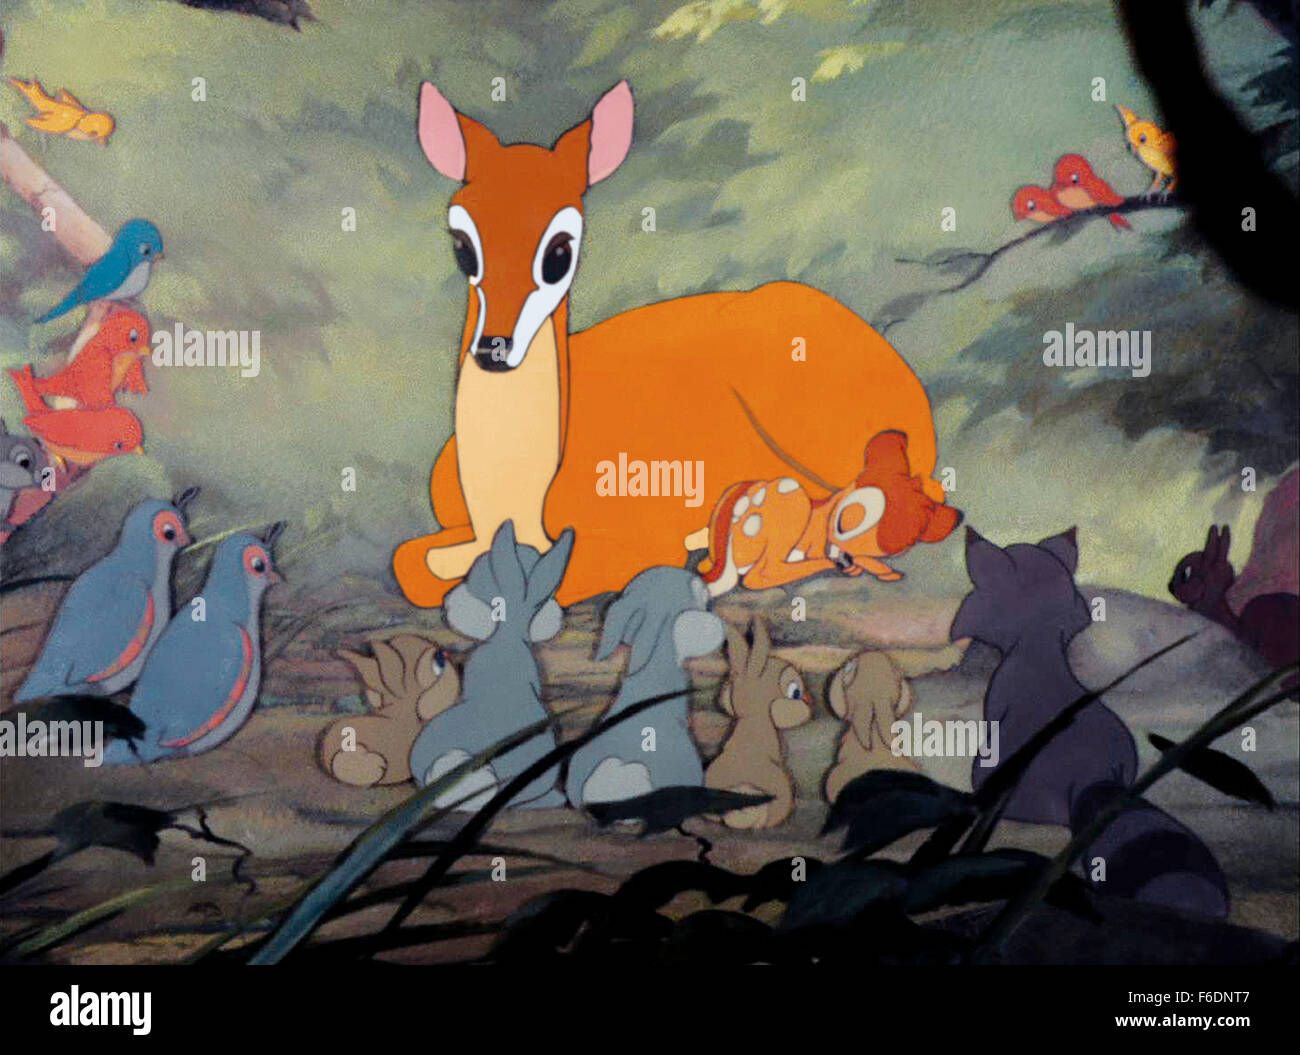 RELEASE DATE: August 21, 1942. MOVIE TITLE: Bambi. STUDIO: Walt Disney  Productions. PLOT: The animated story of Bambi, a young deer hailed as the  'Prince of the Forest' at his birth. As